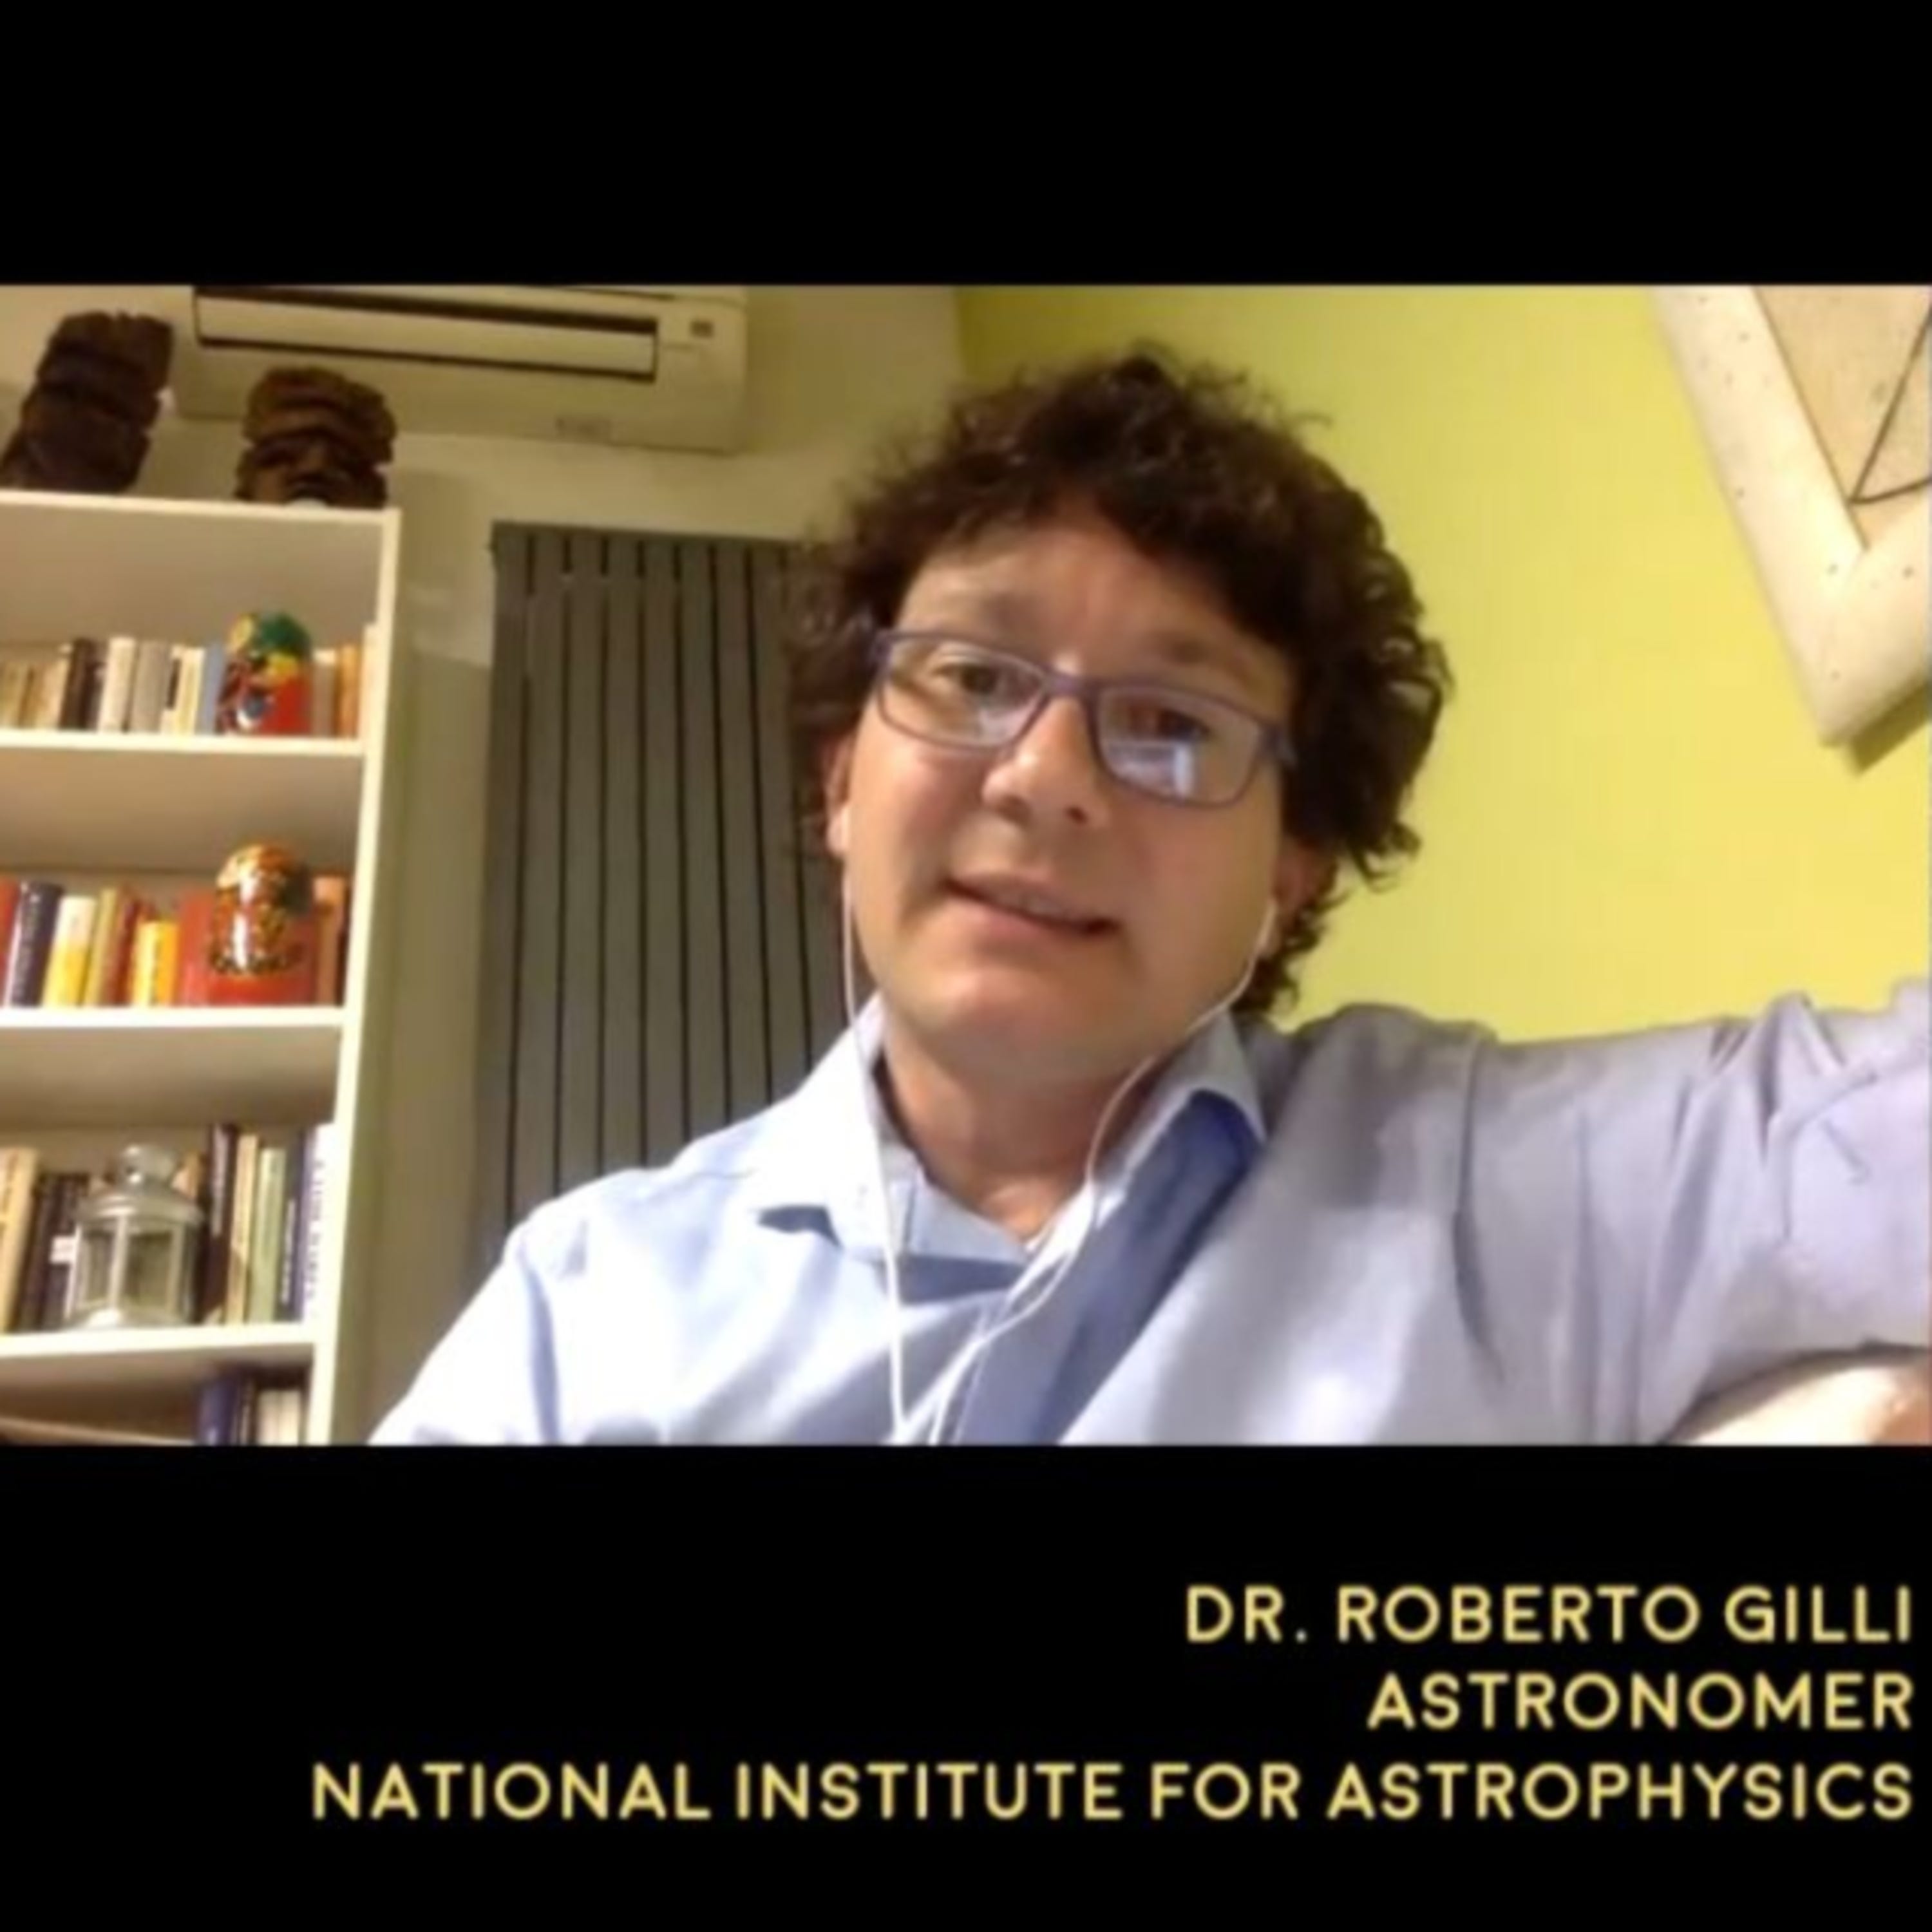 Roberto Gilli - Finding Six Galaxies Orbiting an Ancient Black Hole - The Cosmic Companion October 20, 2020